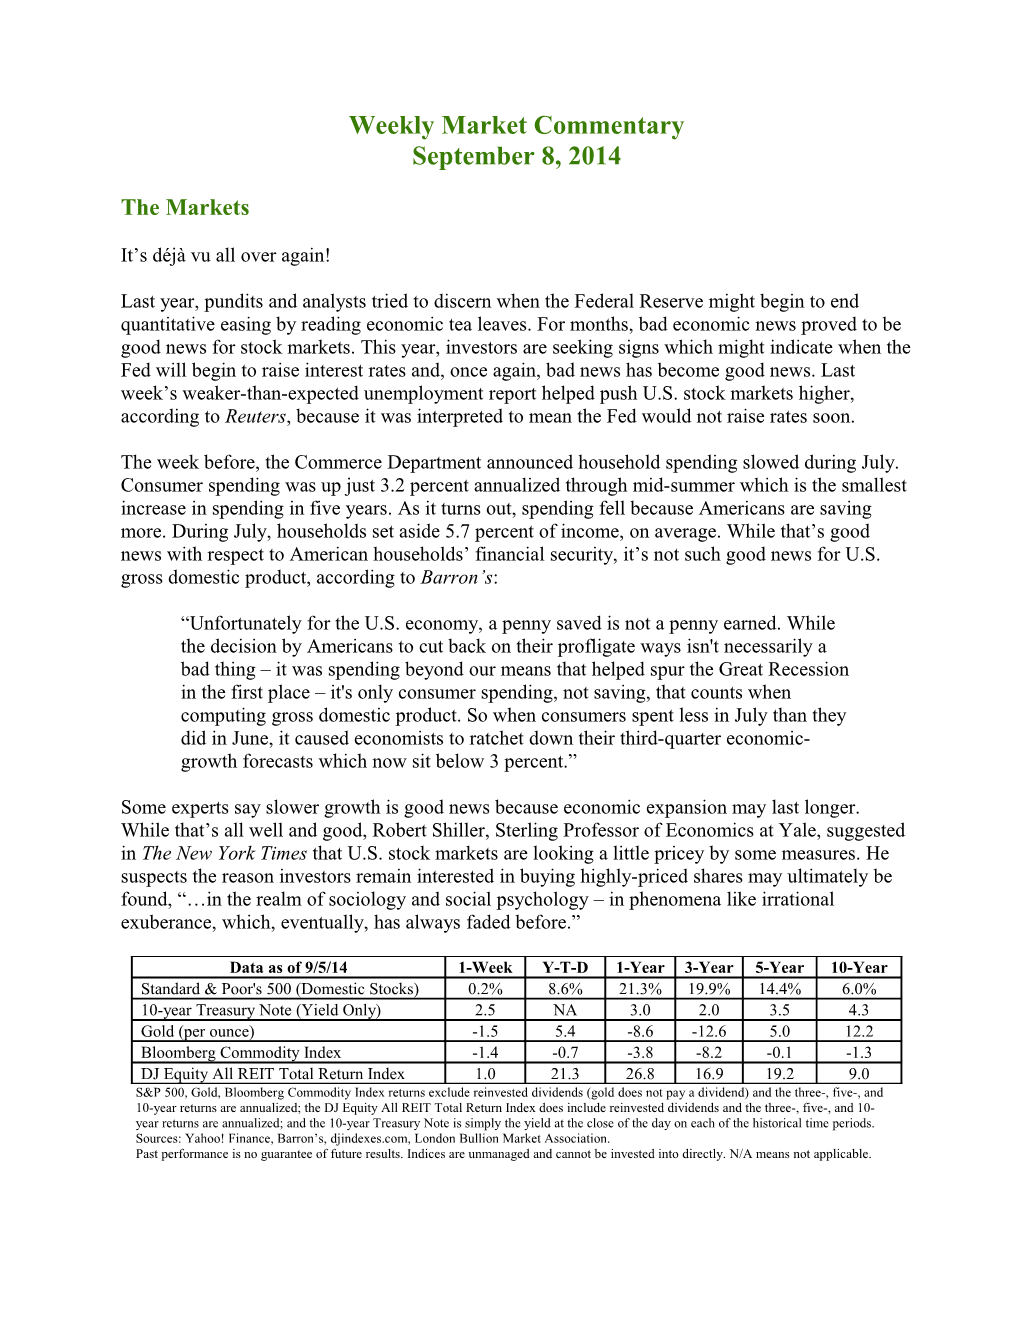 Weekly Commentary 09-08-14 PAA